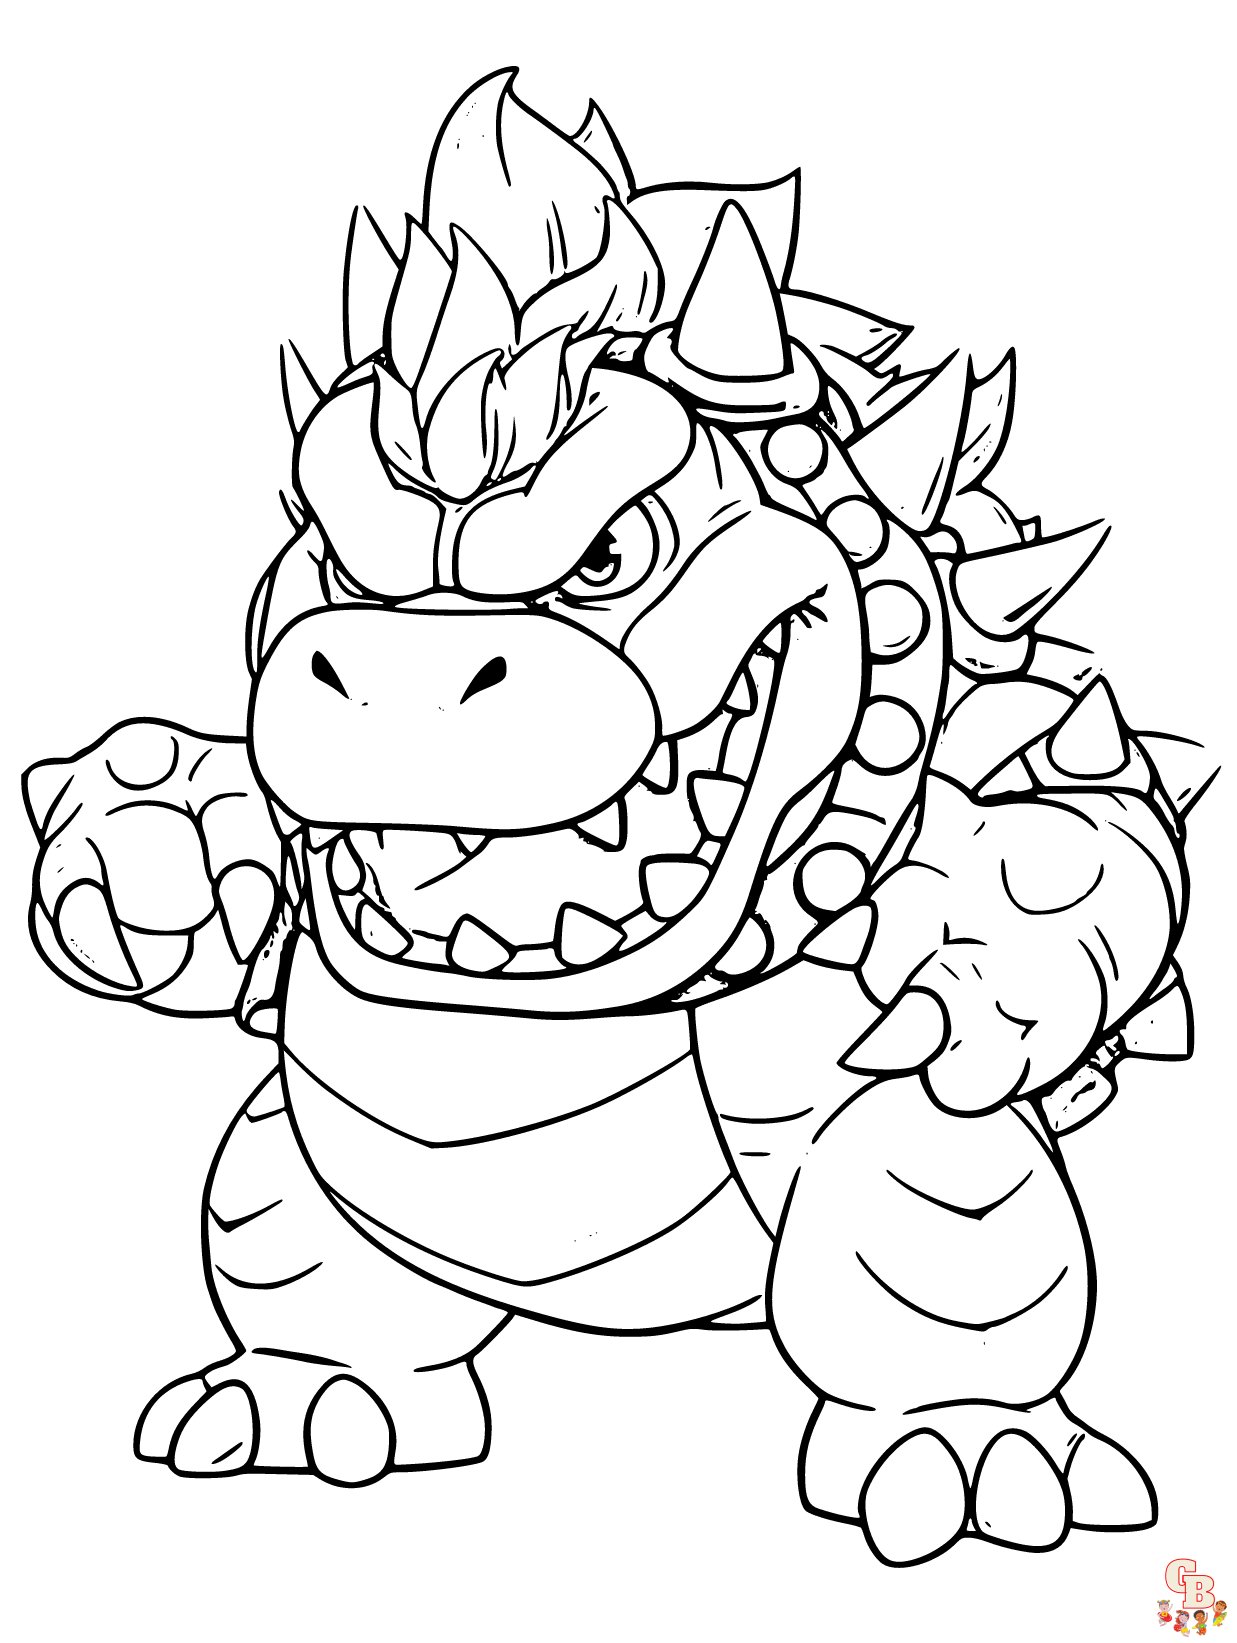 Bowser coloring pages 2